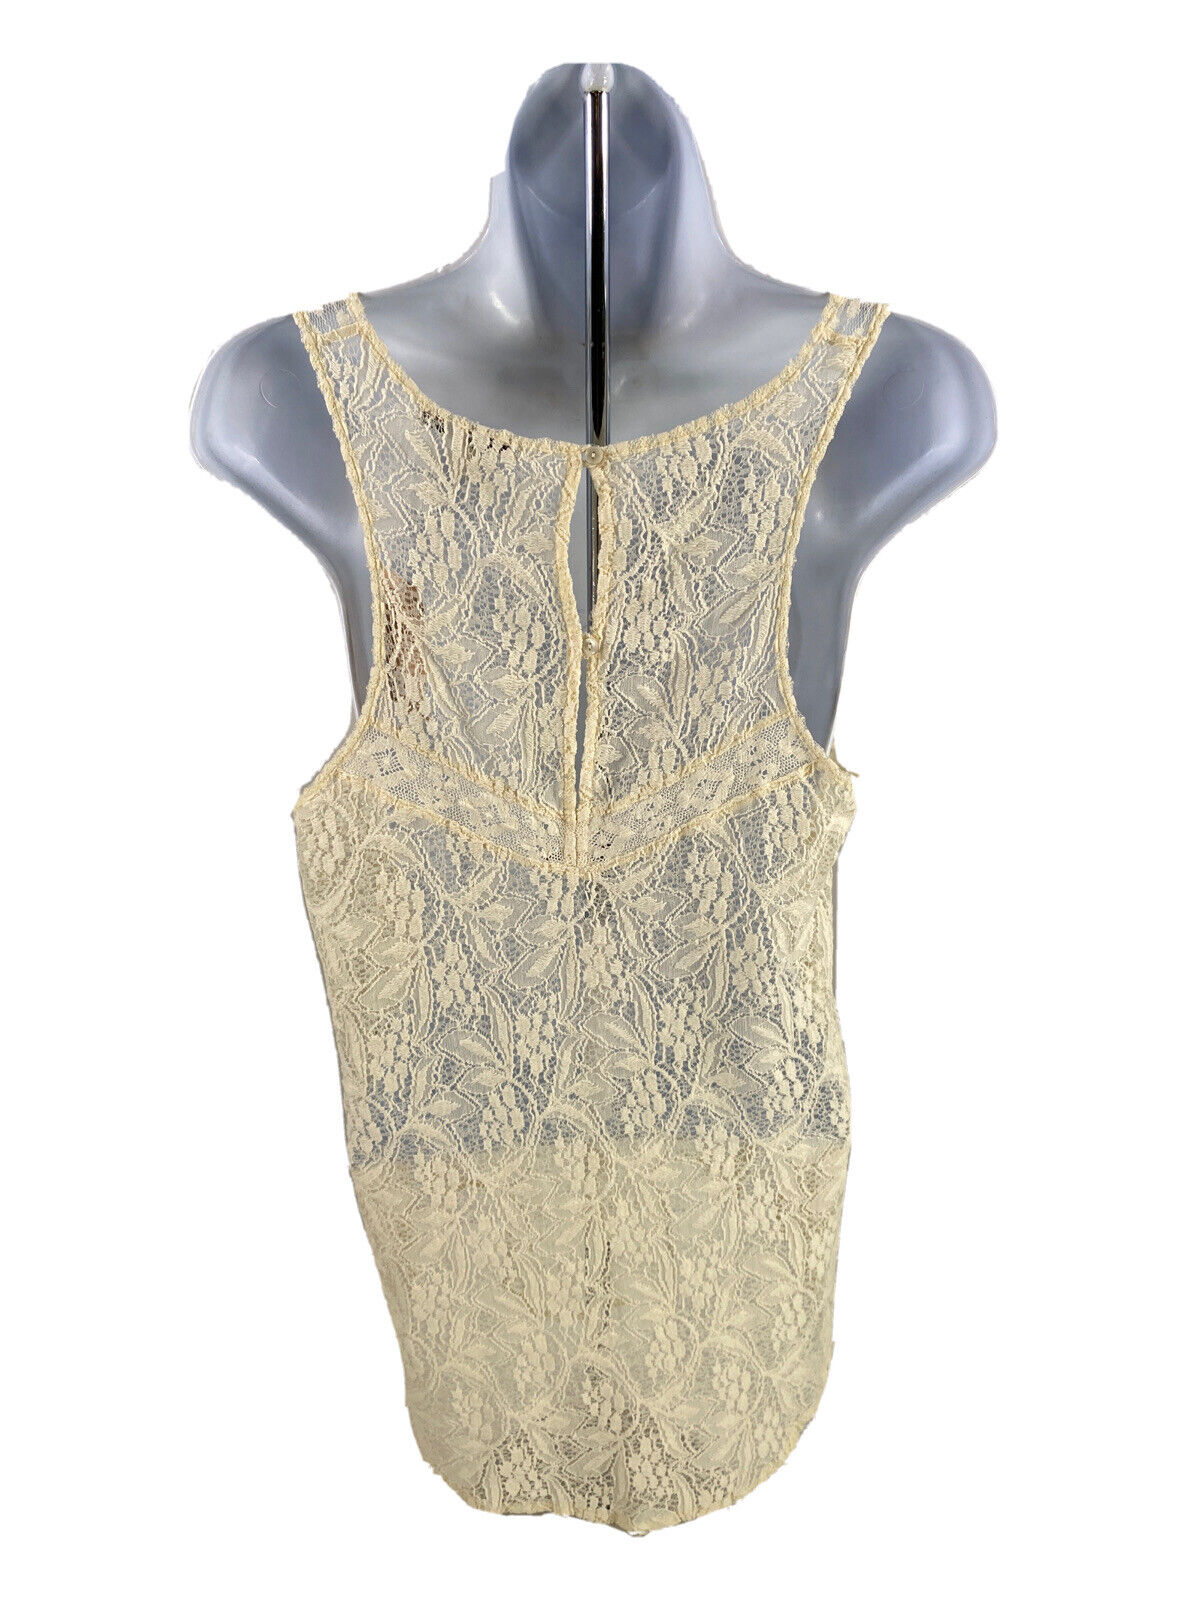 NEW American Eagle Women's Ivory Lace Sleeveless Tank Top - S